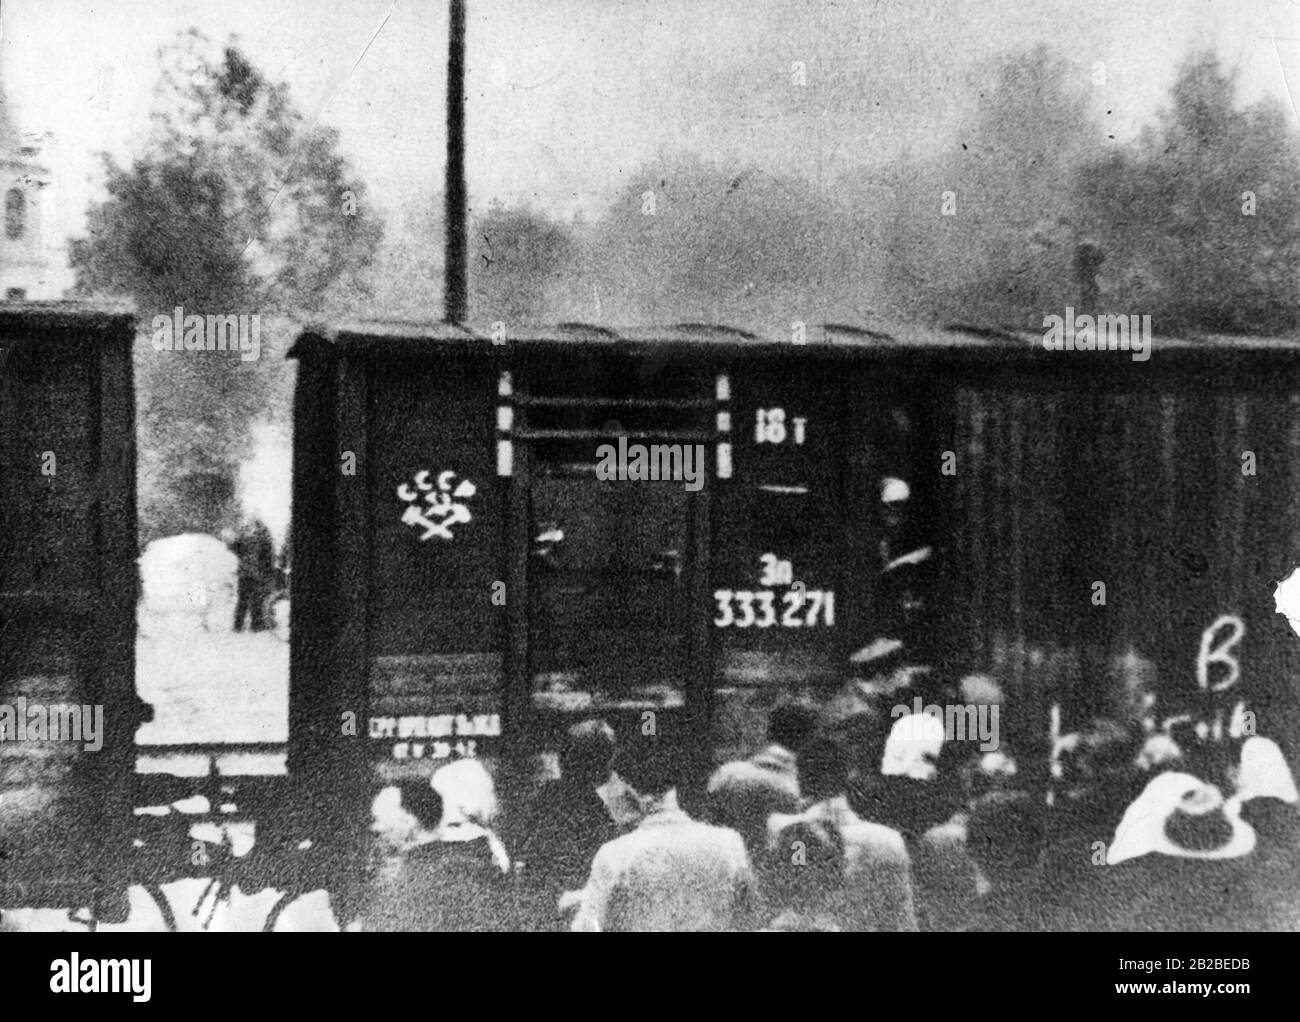 Soviet forced laborers are taken to labor camps in Siberia in overcrowded freight trains. Undated photo, probably in the 1930s. Stock Photo